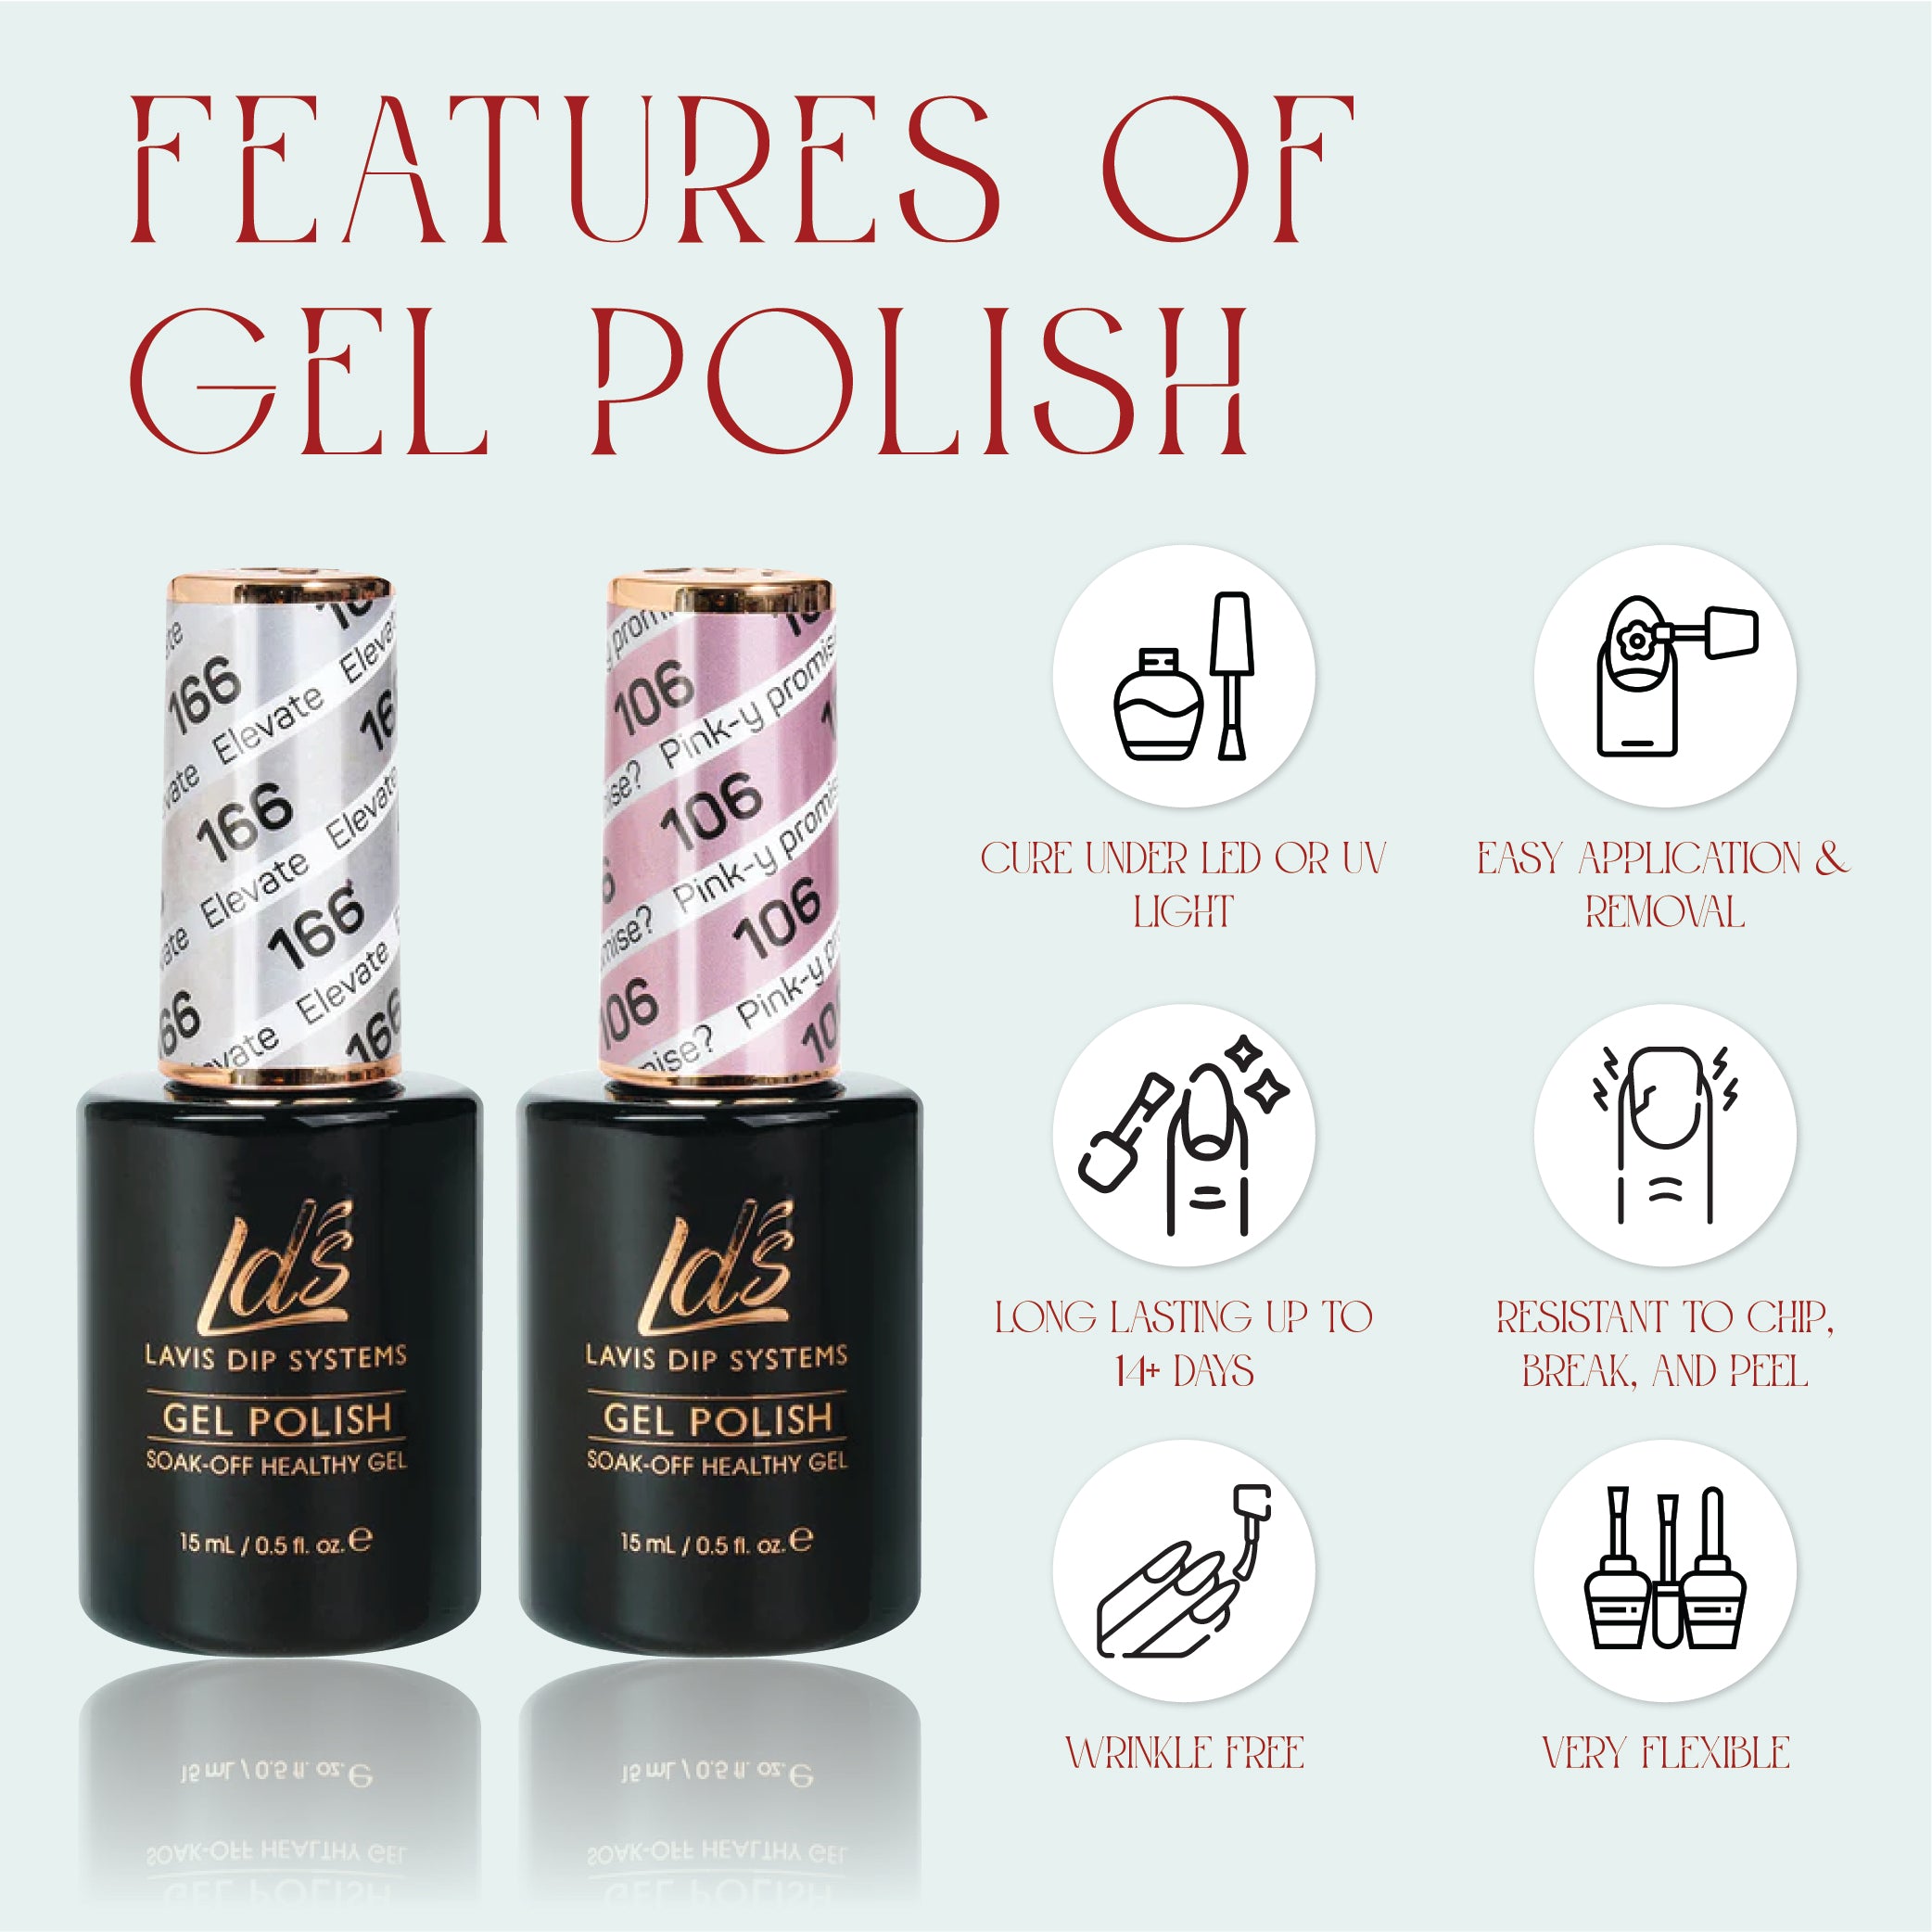 LDS 176 Autumn Russet - LDS Healthy Gel Polish & Matching Nail Lacquer Duo Set - 0.5oz